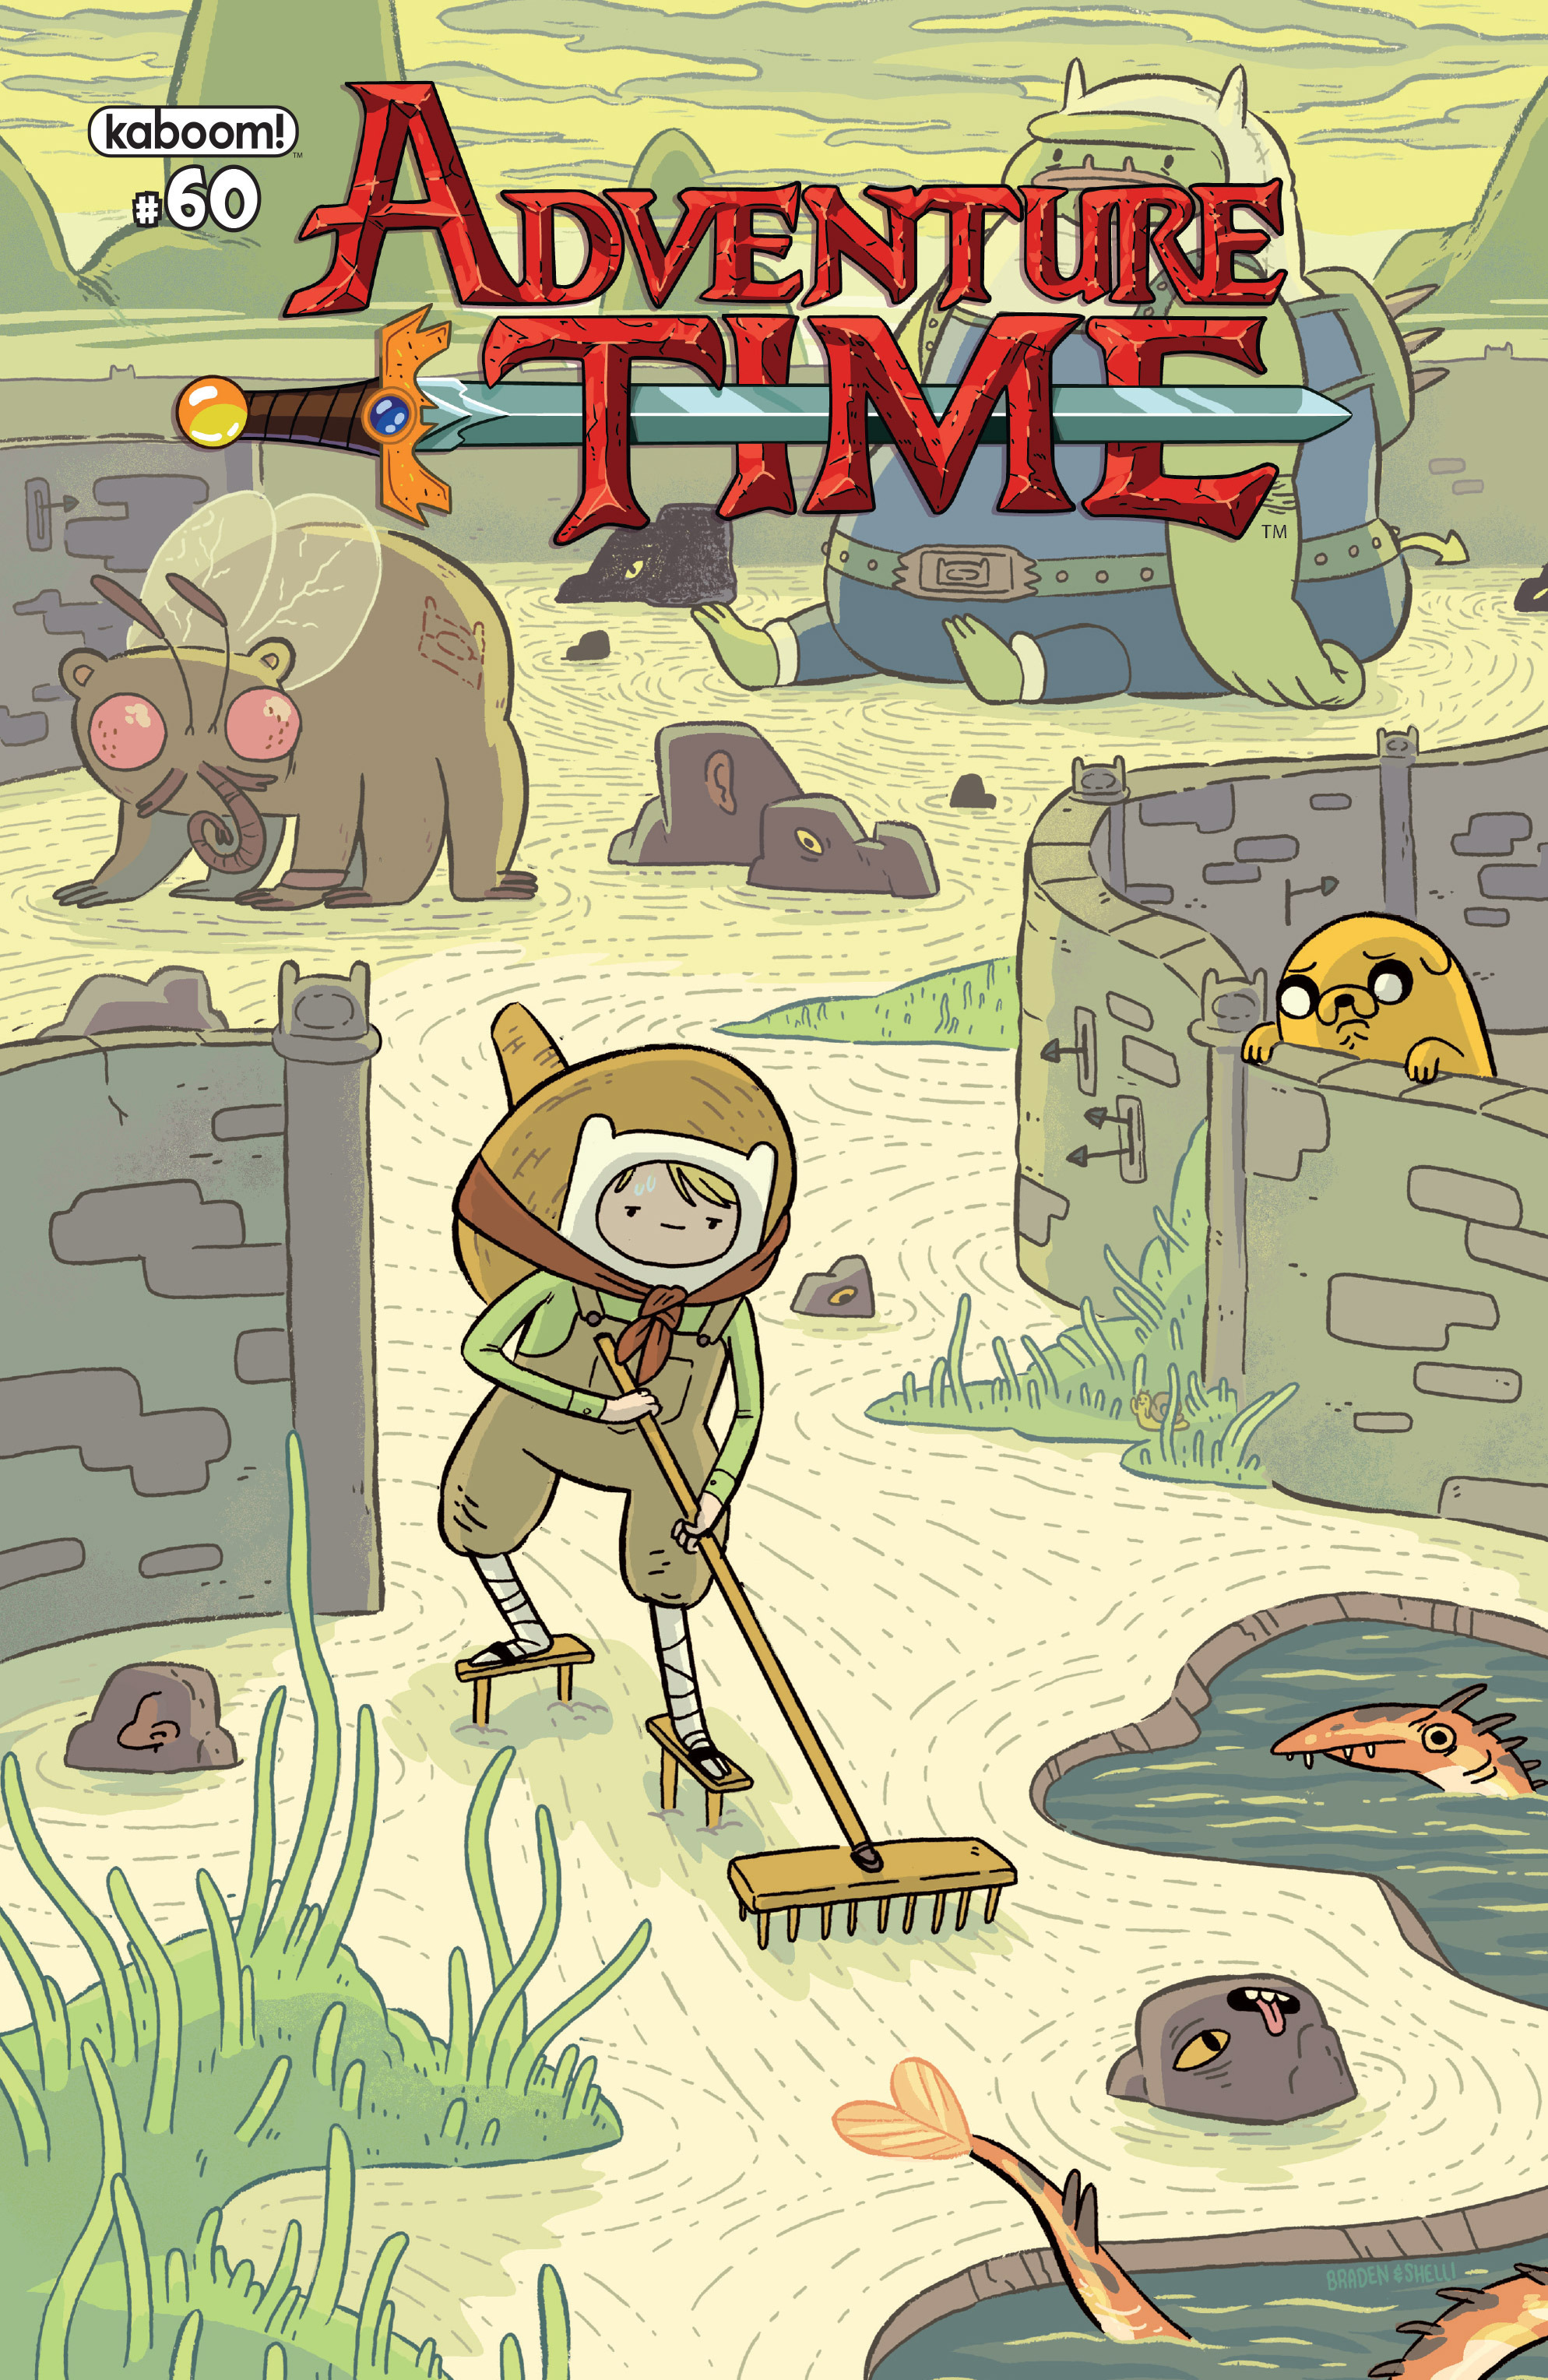 Adventure Time (2012-): Chapter 60 - Page 1